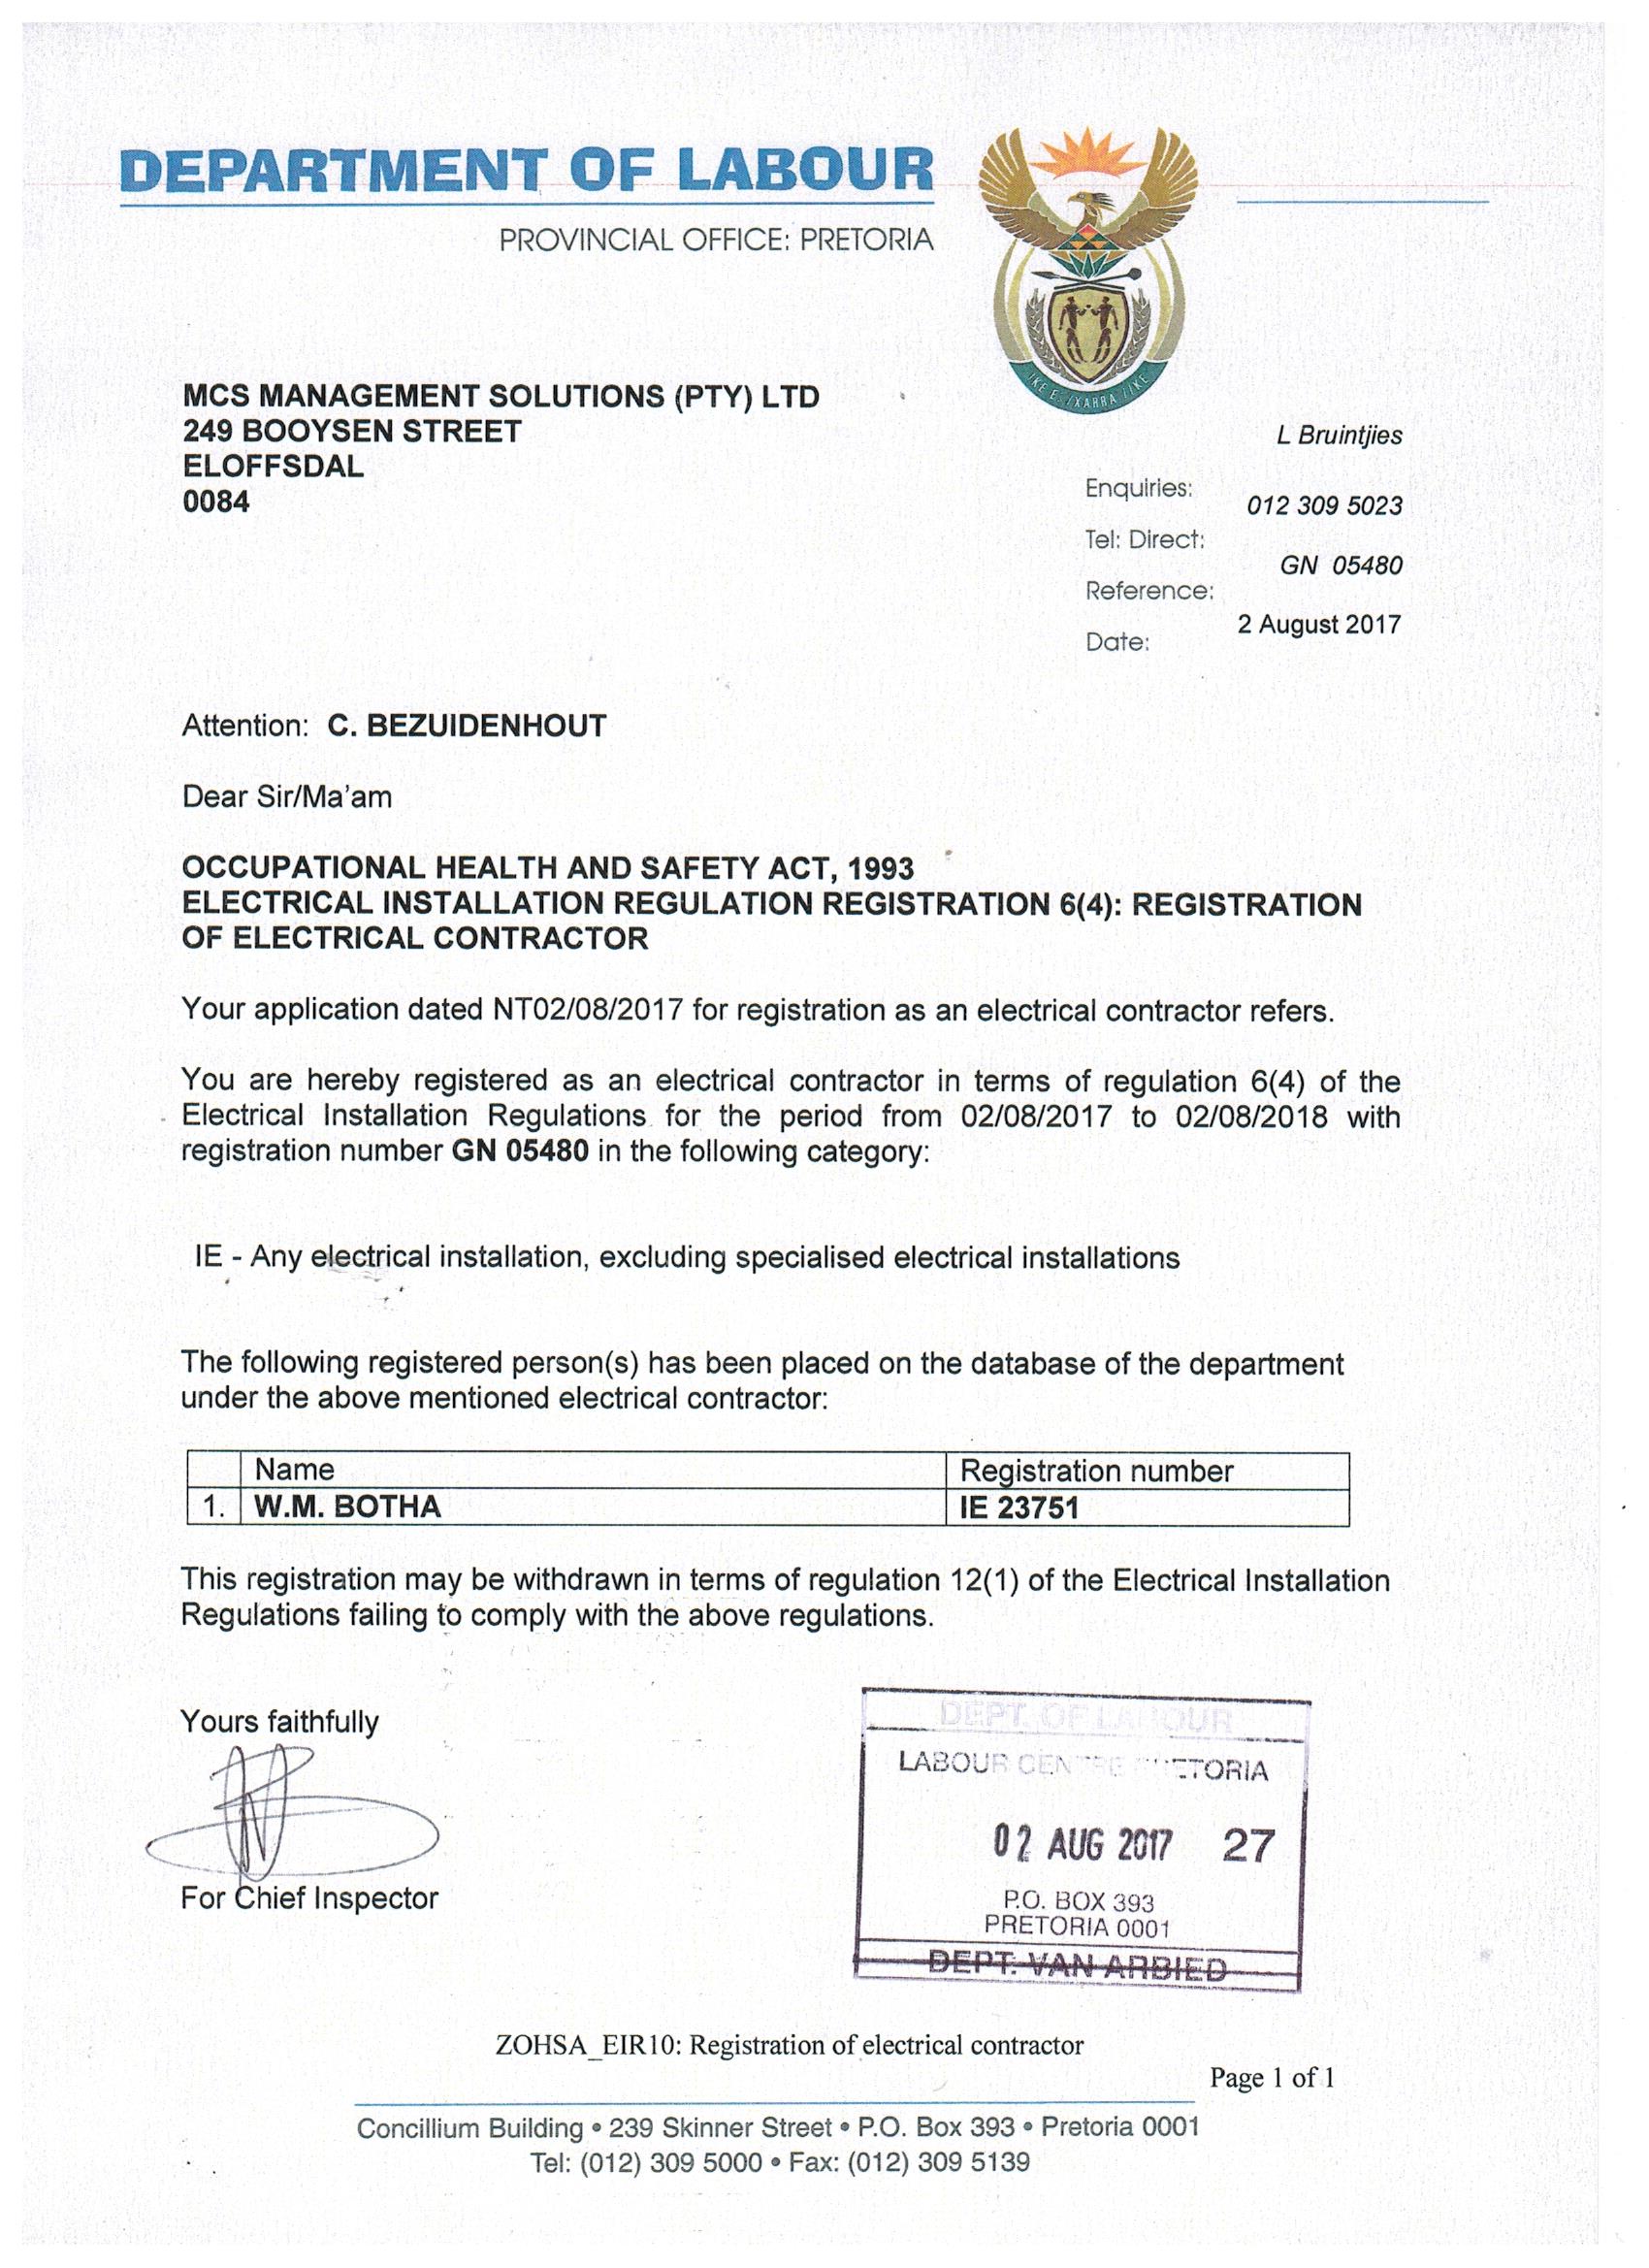 MCS Managment Solutions - Department of Labour - Electrical Letter